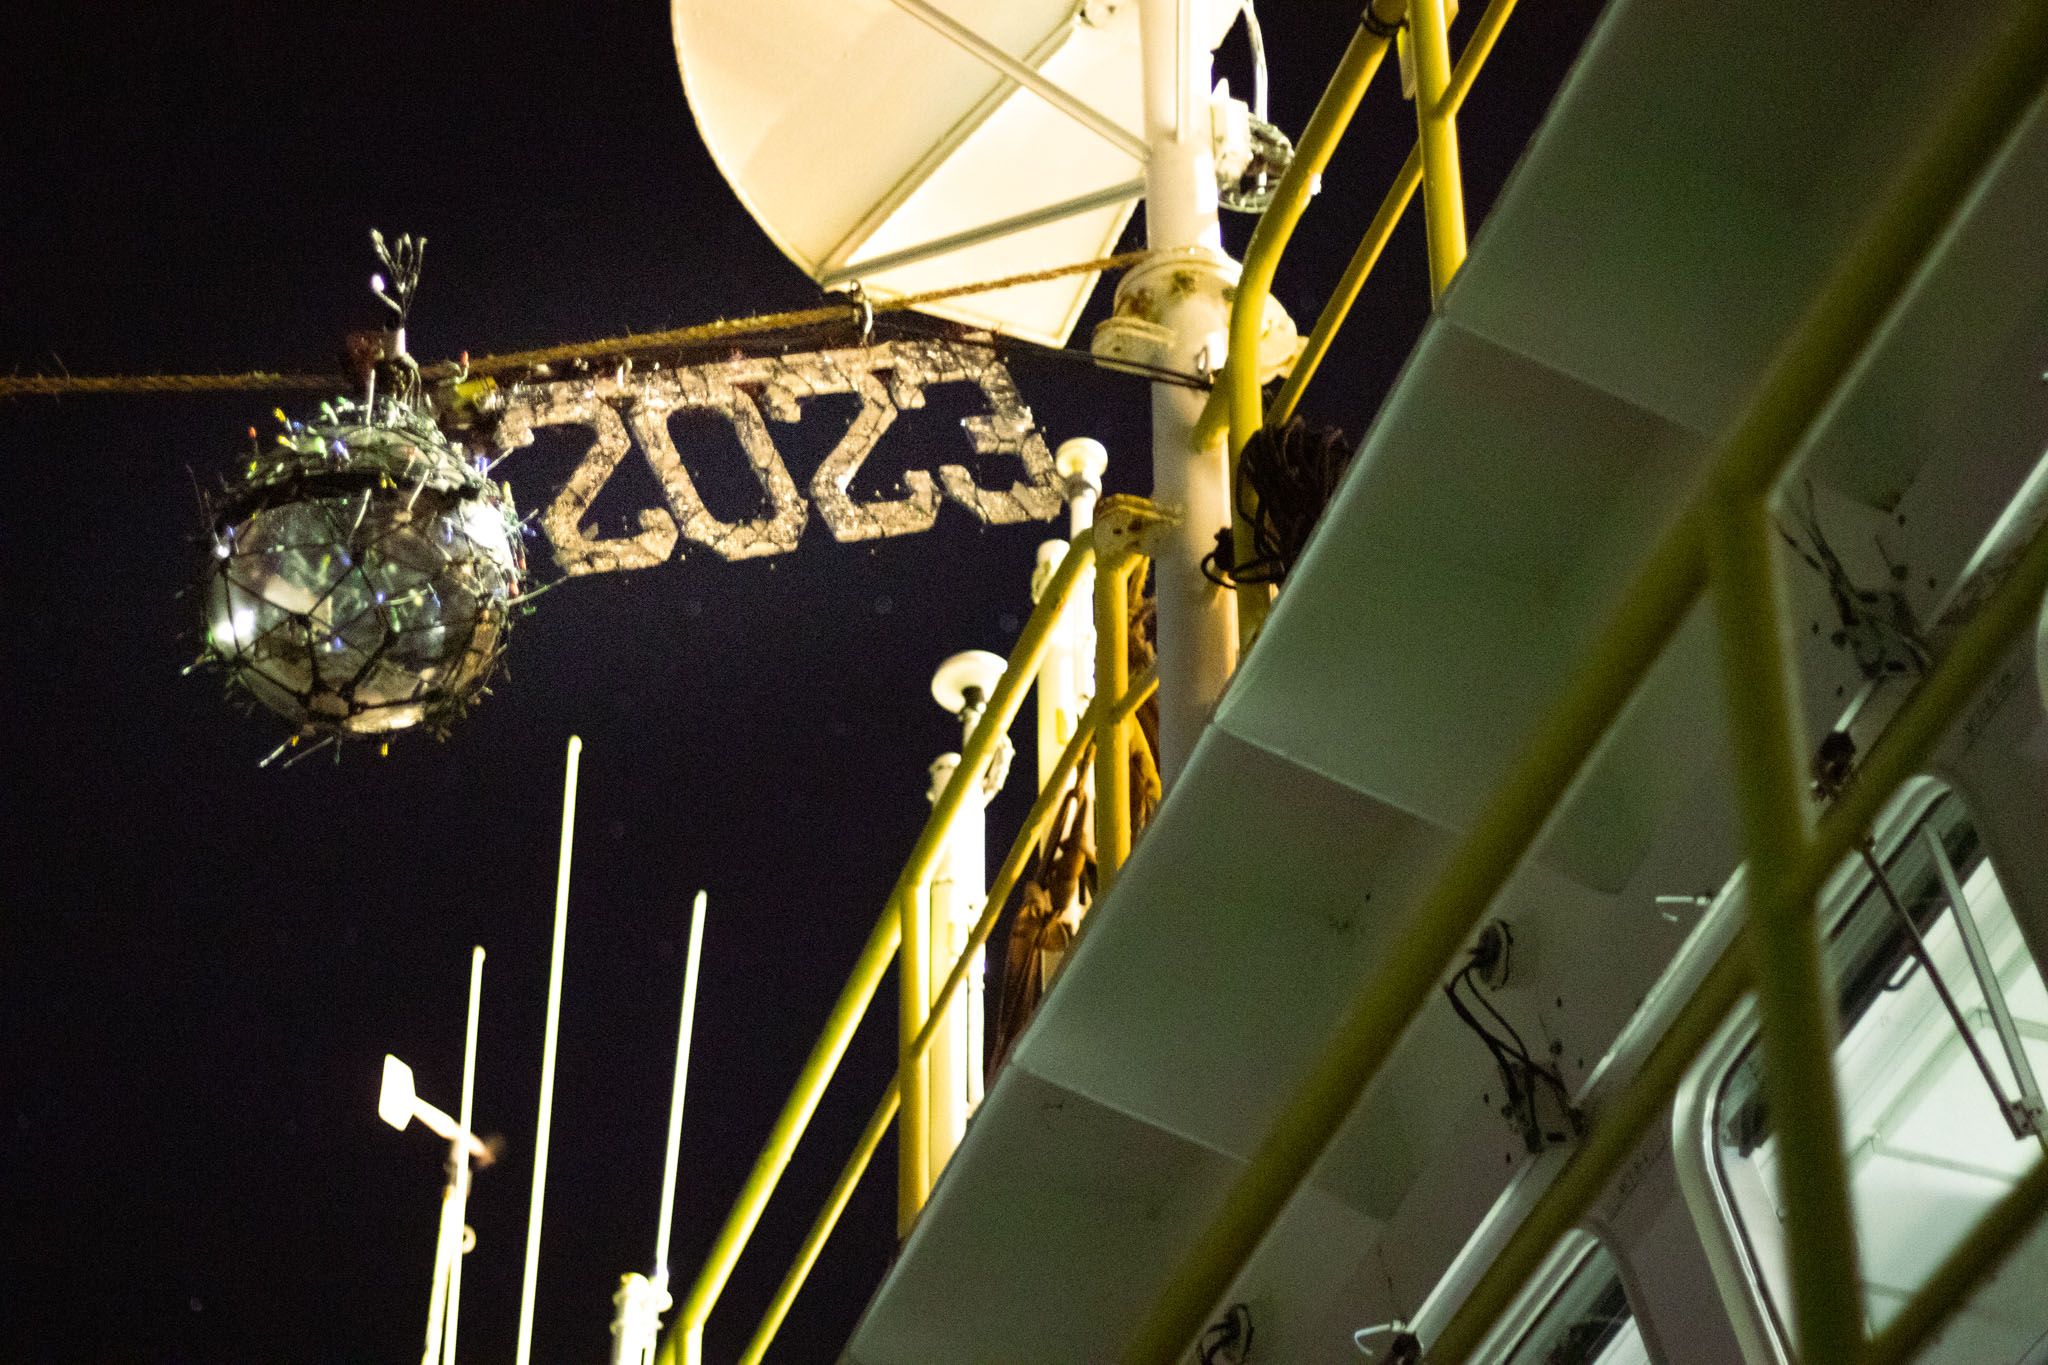 A christmas-light covered ball hangs next to decorative 2023 numbers. In the background we see a ship's deck.